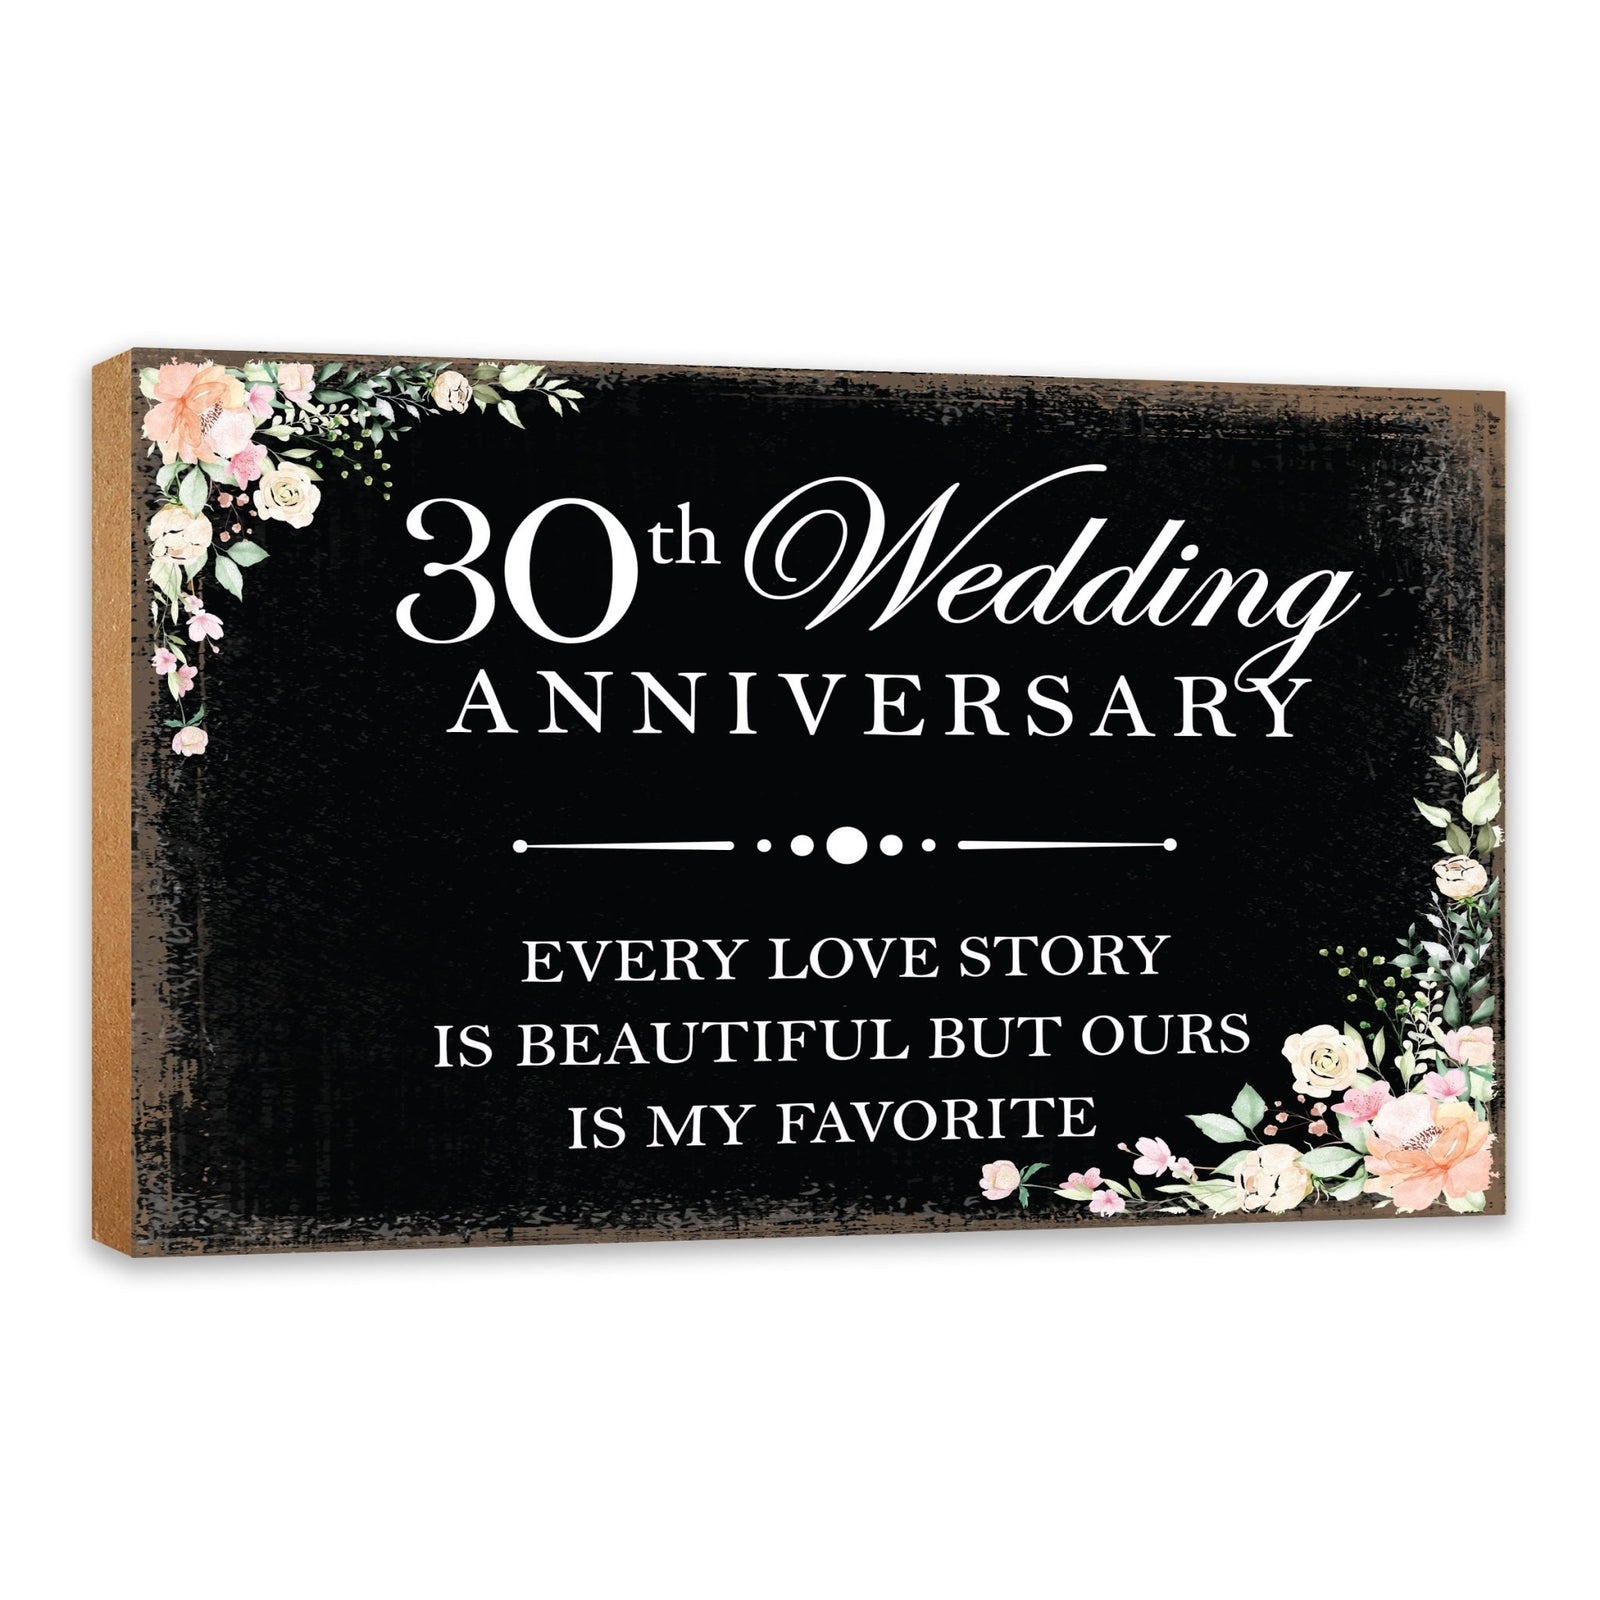 30th Wedding Anniversary Unique Shelf Decor and Tabletop Signs Gift for Couples - Every Love Story - LifeSong Milestones